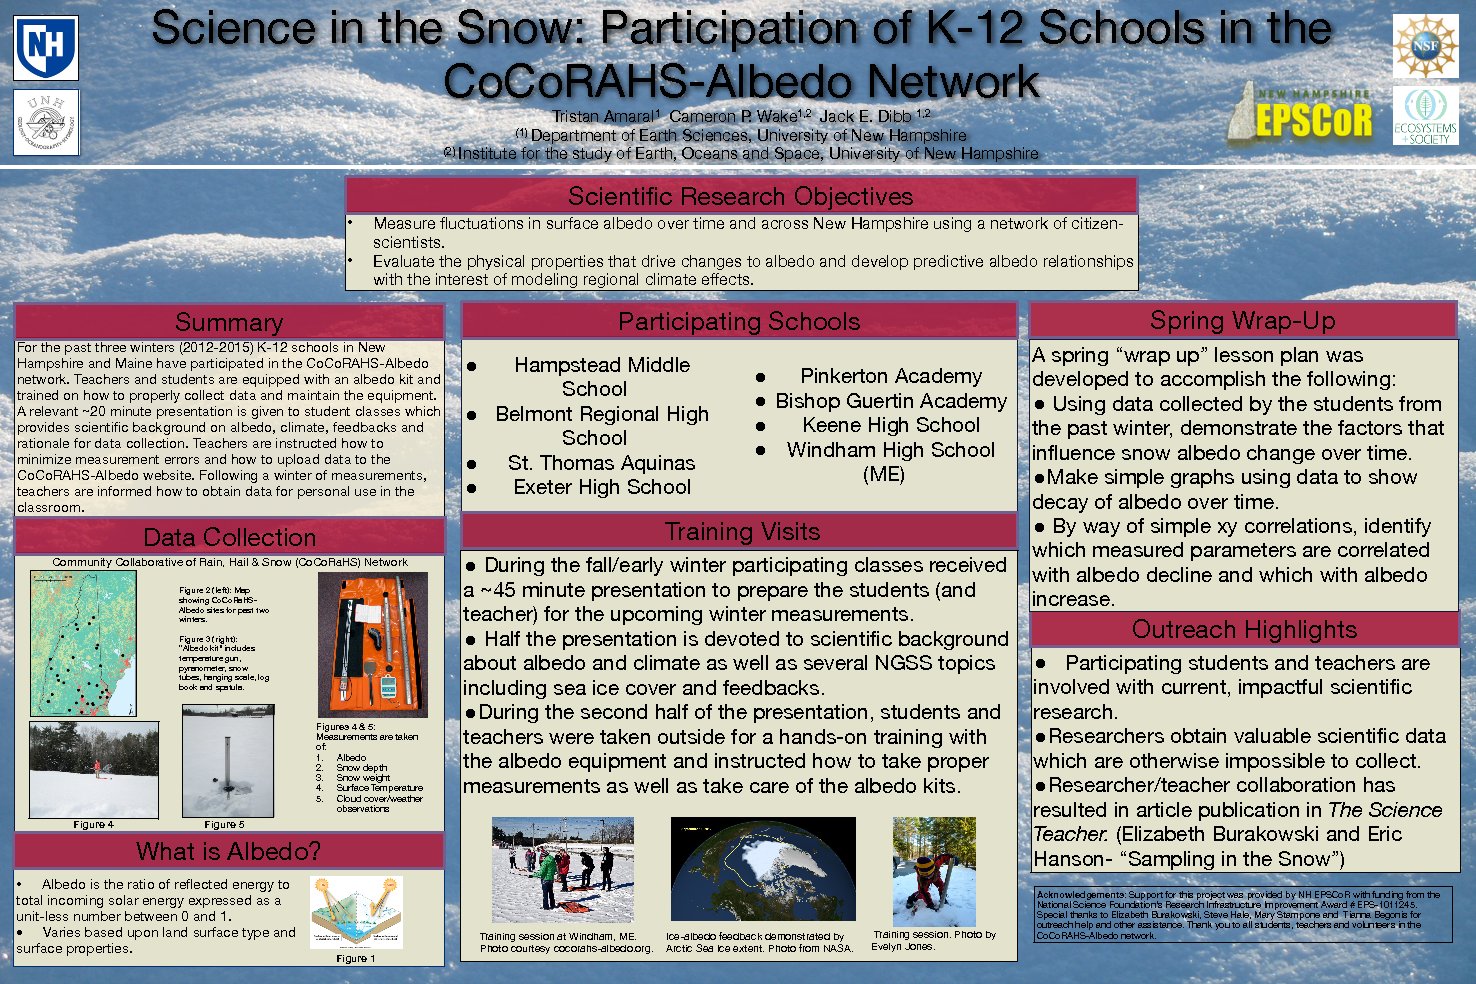 Science In The Snow: Participation Of K-12 Educators In The Cocorahs-Albedo Network by tov4